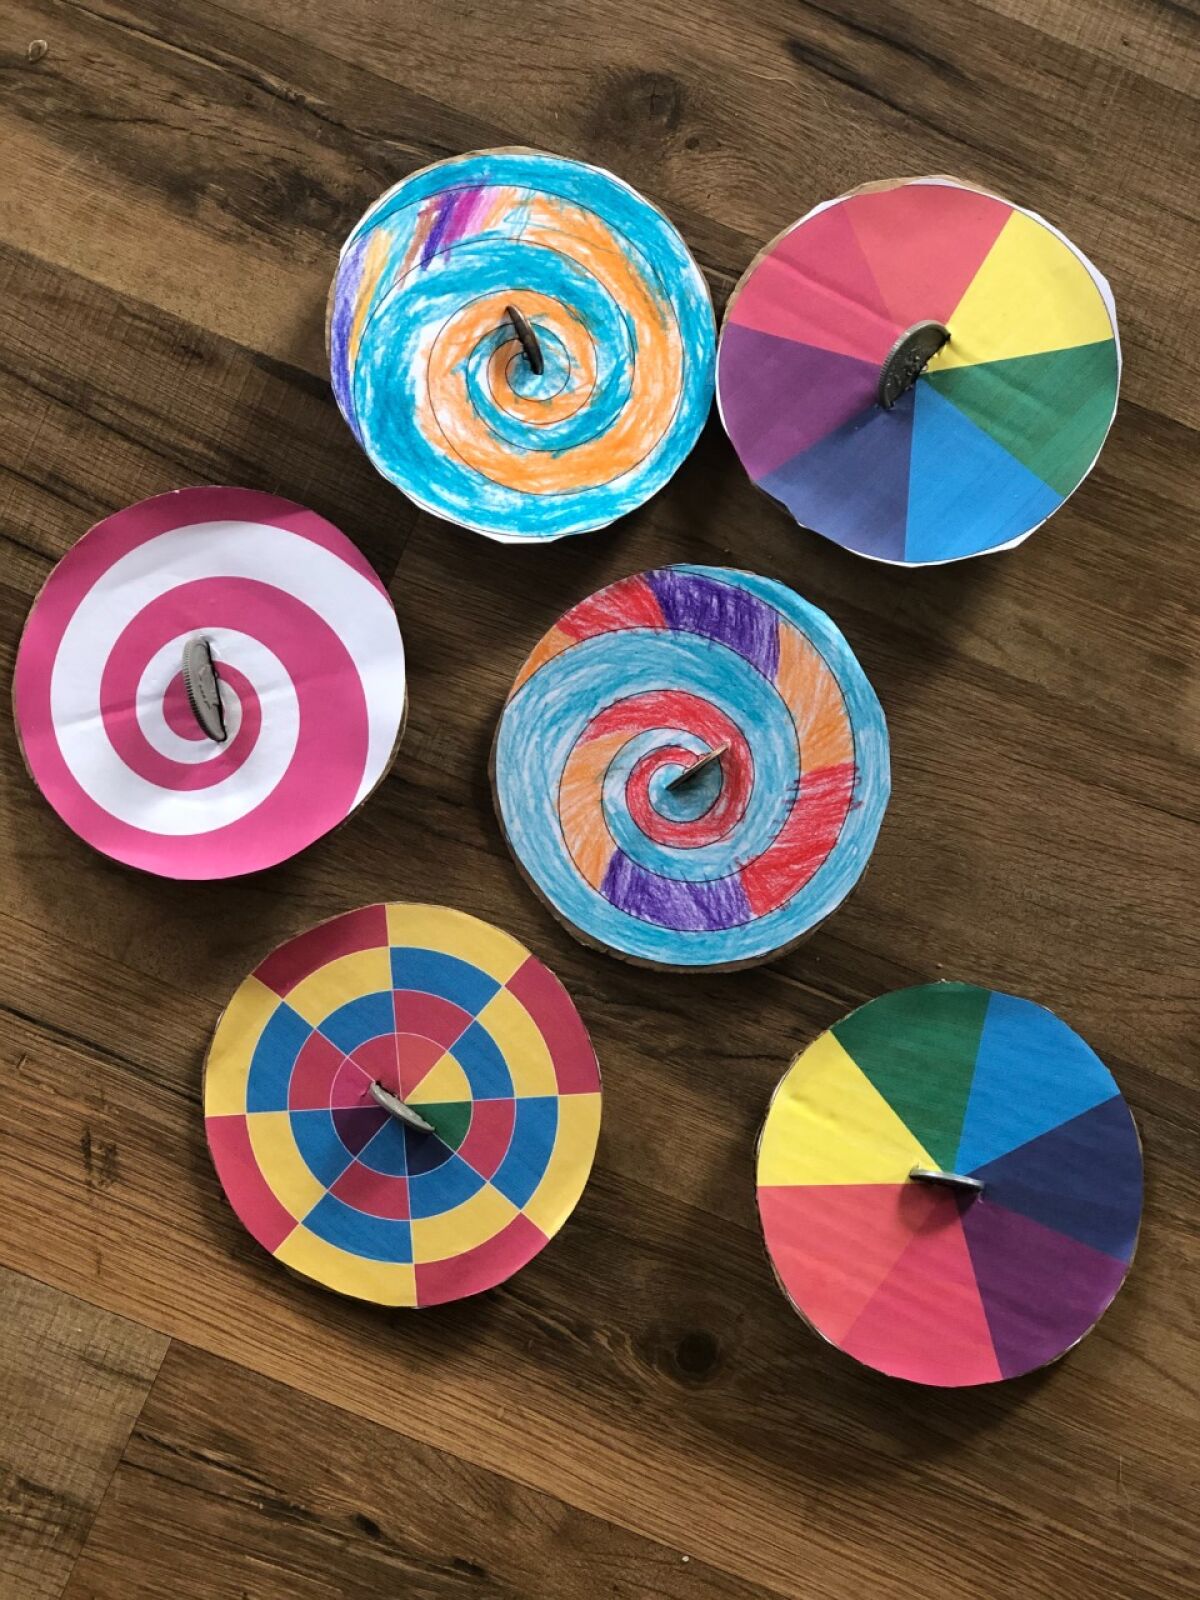 Crystal Toledo of San Diego made spinners with her children, whose schools are closed due to the coronavirus pandemic.